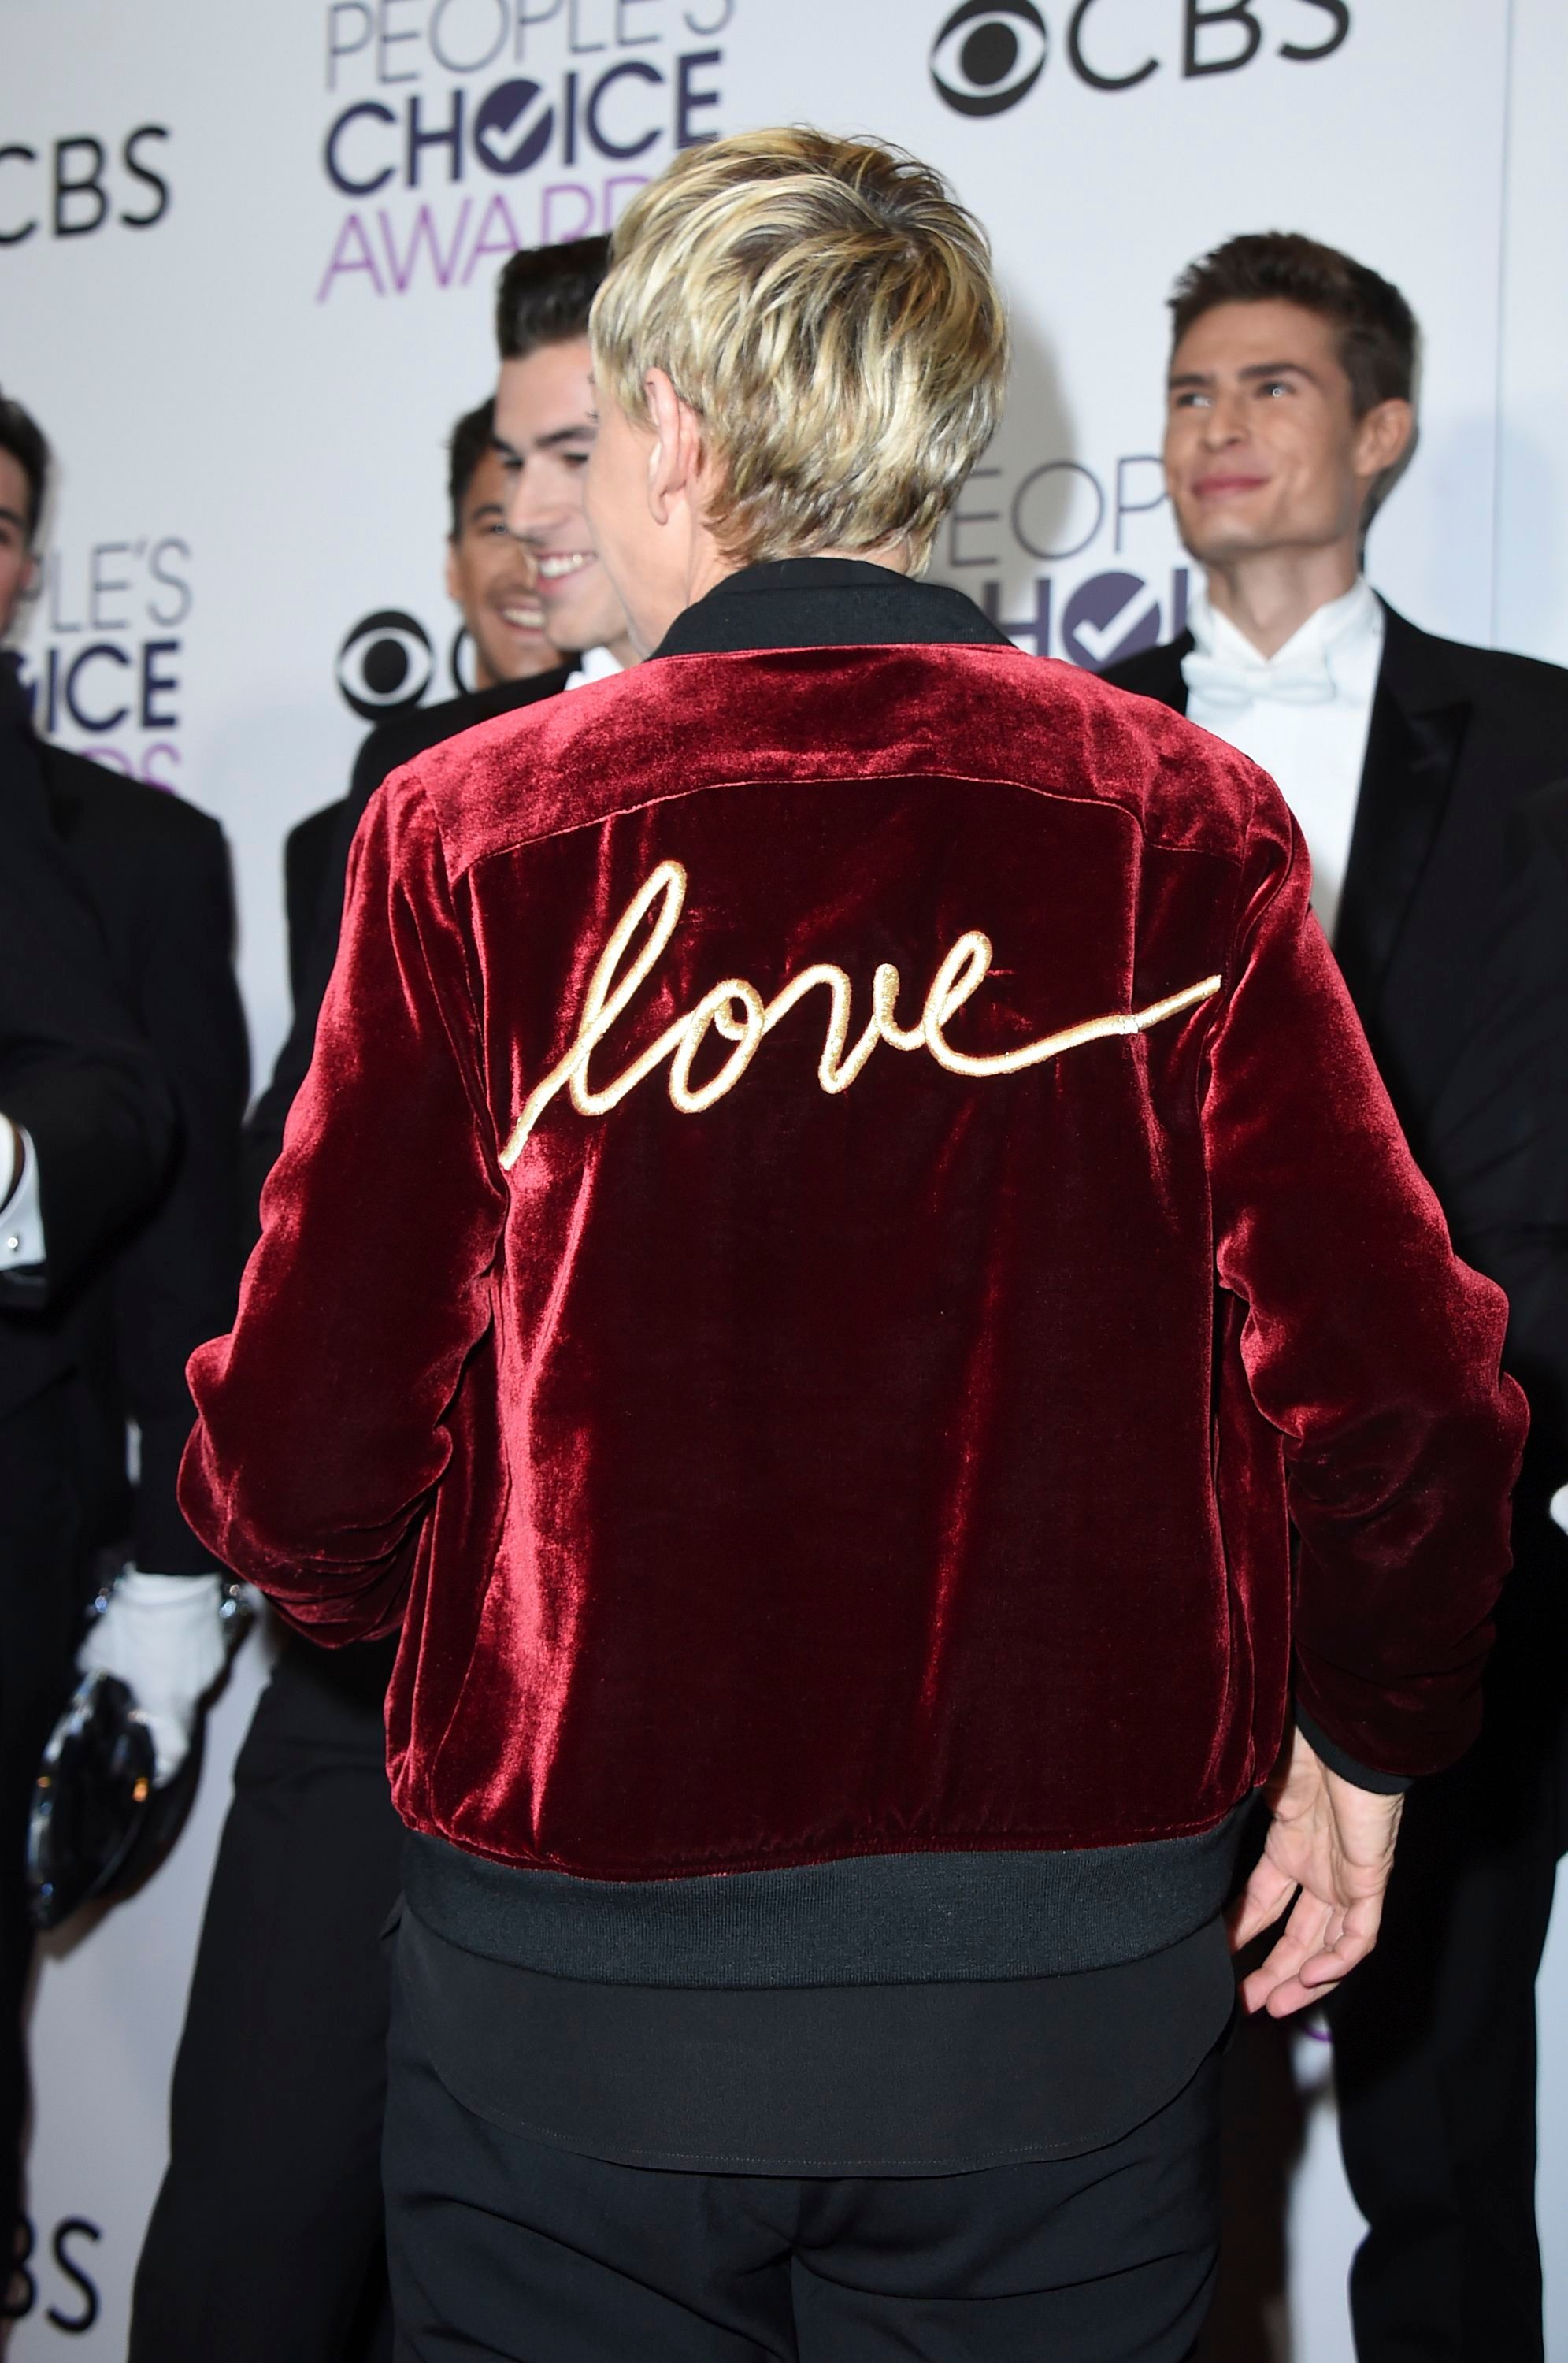 DeGeneres’ adorns her brand’s Love Varsity Jacket at the People's Choice Awards 2017 in Los Angeles, California. (Photo: Shutterstock)